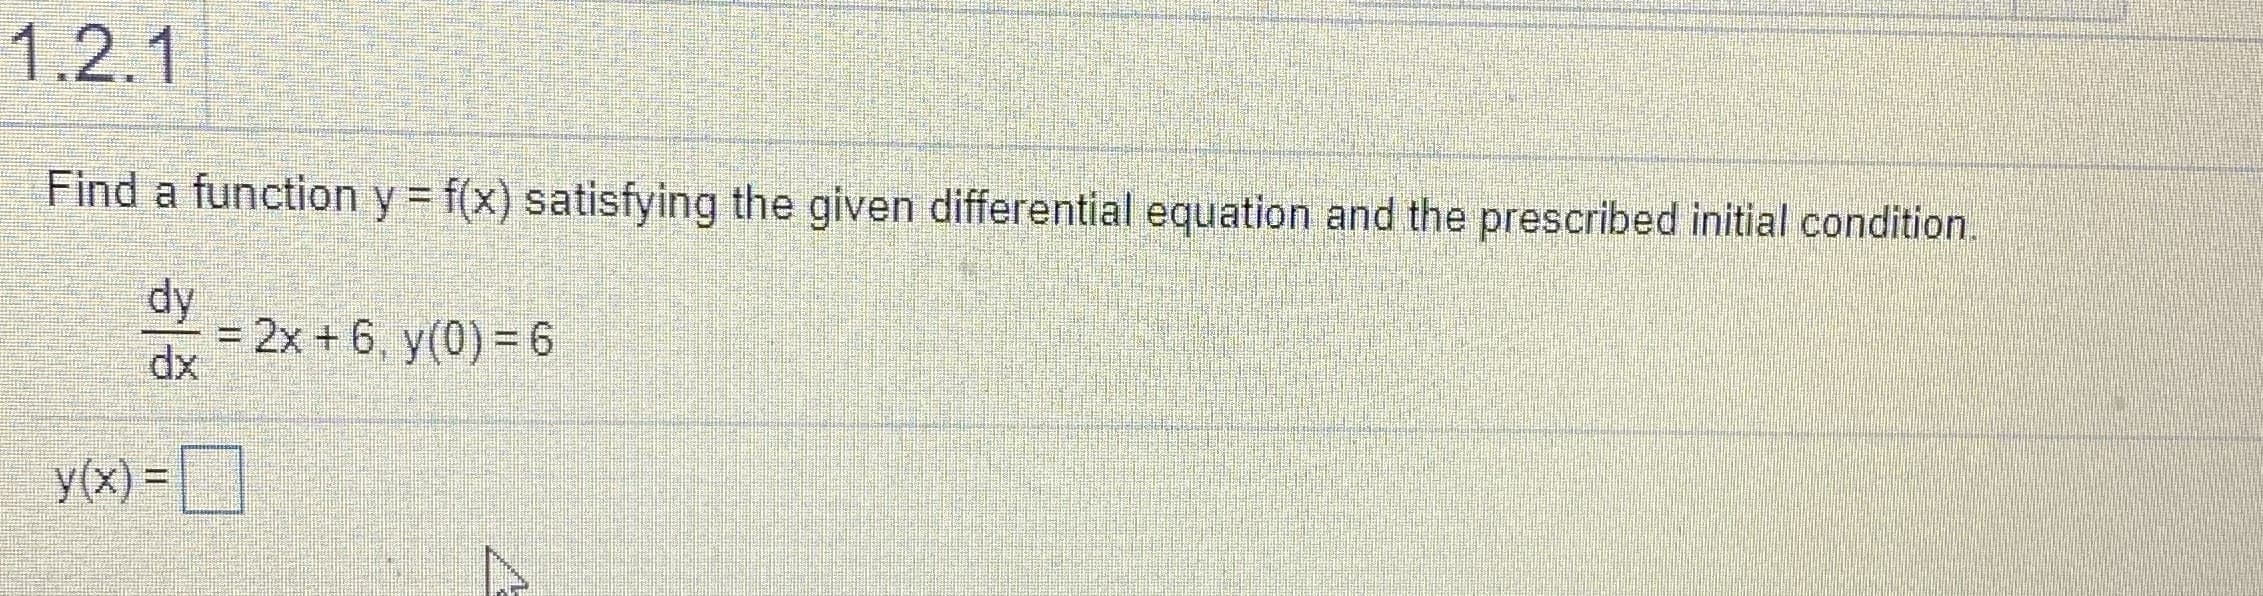 1.2.1
Find a function y = f(x) satisfying the given differential equation and the prescribed initial condition.
dy
= 2x + 6, y(0) =6
dx
y(x) =D
